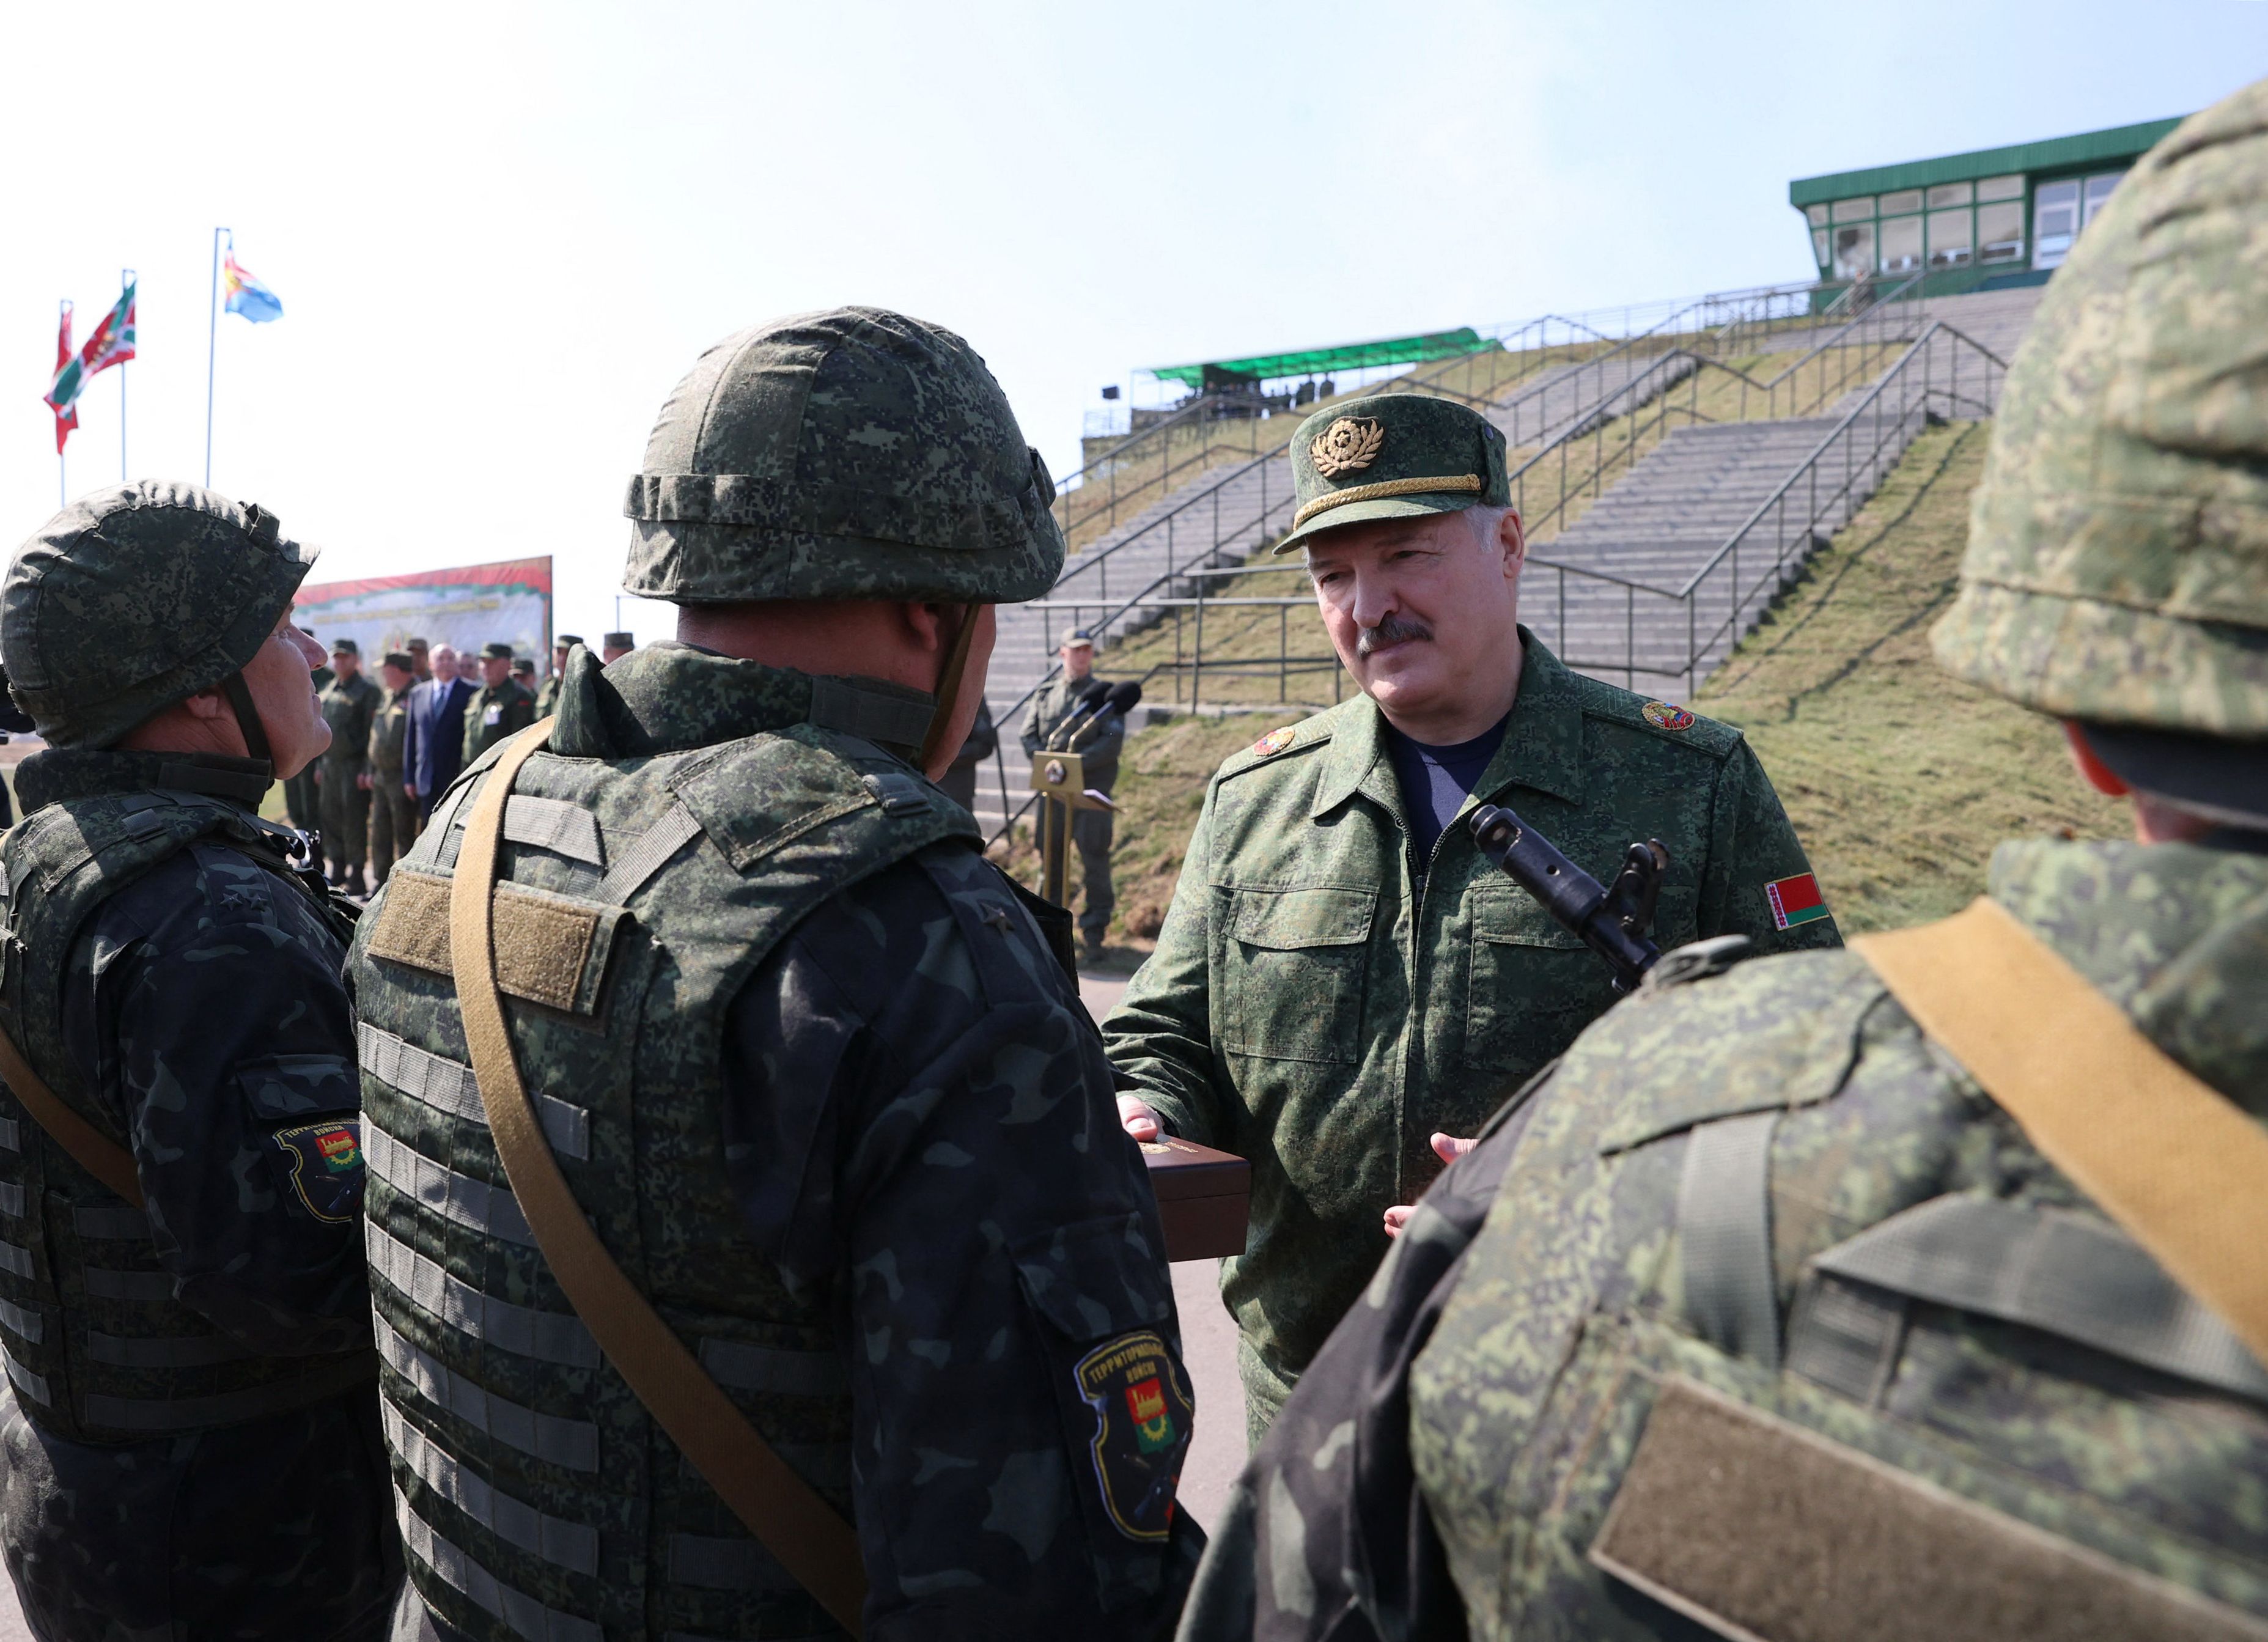 Reports suggest Belarus prepares to send its troops to Ukraine, joining Putin in war